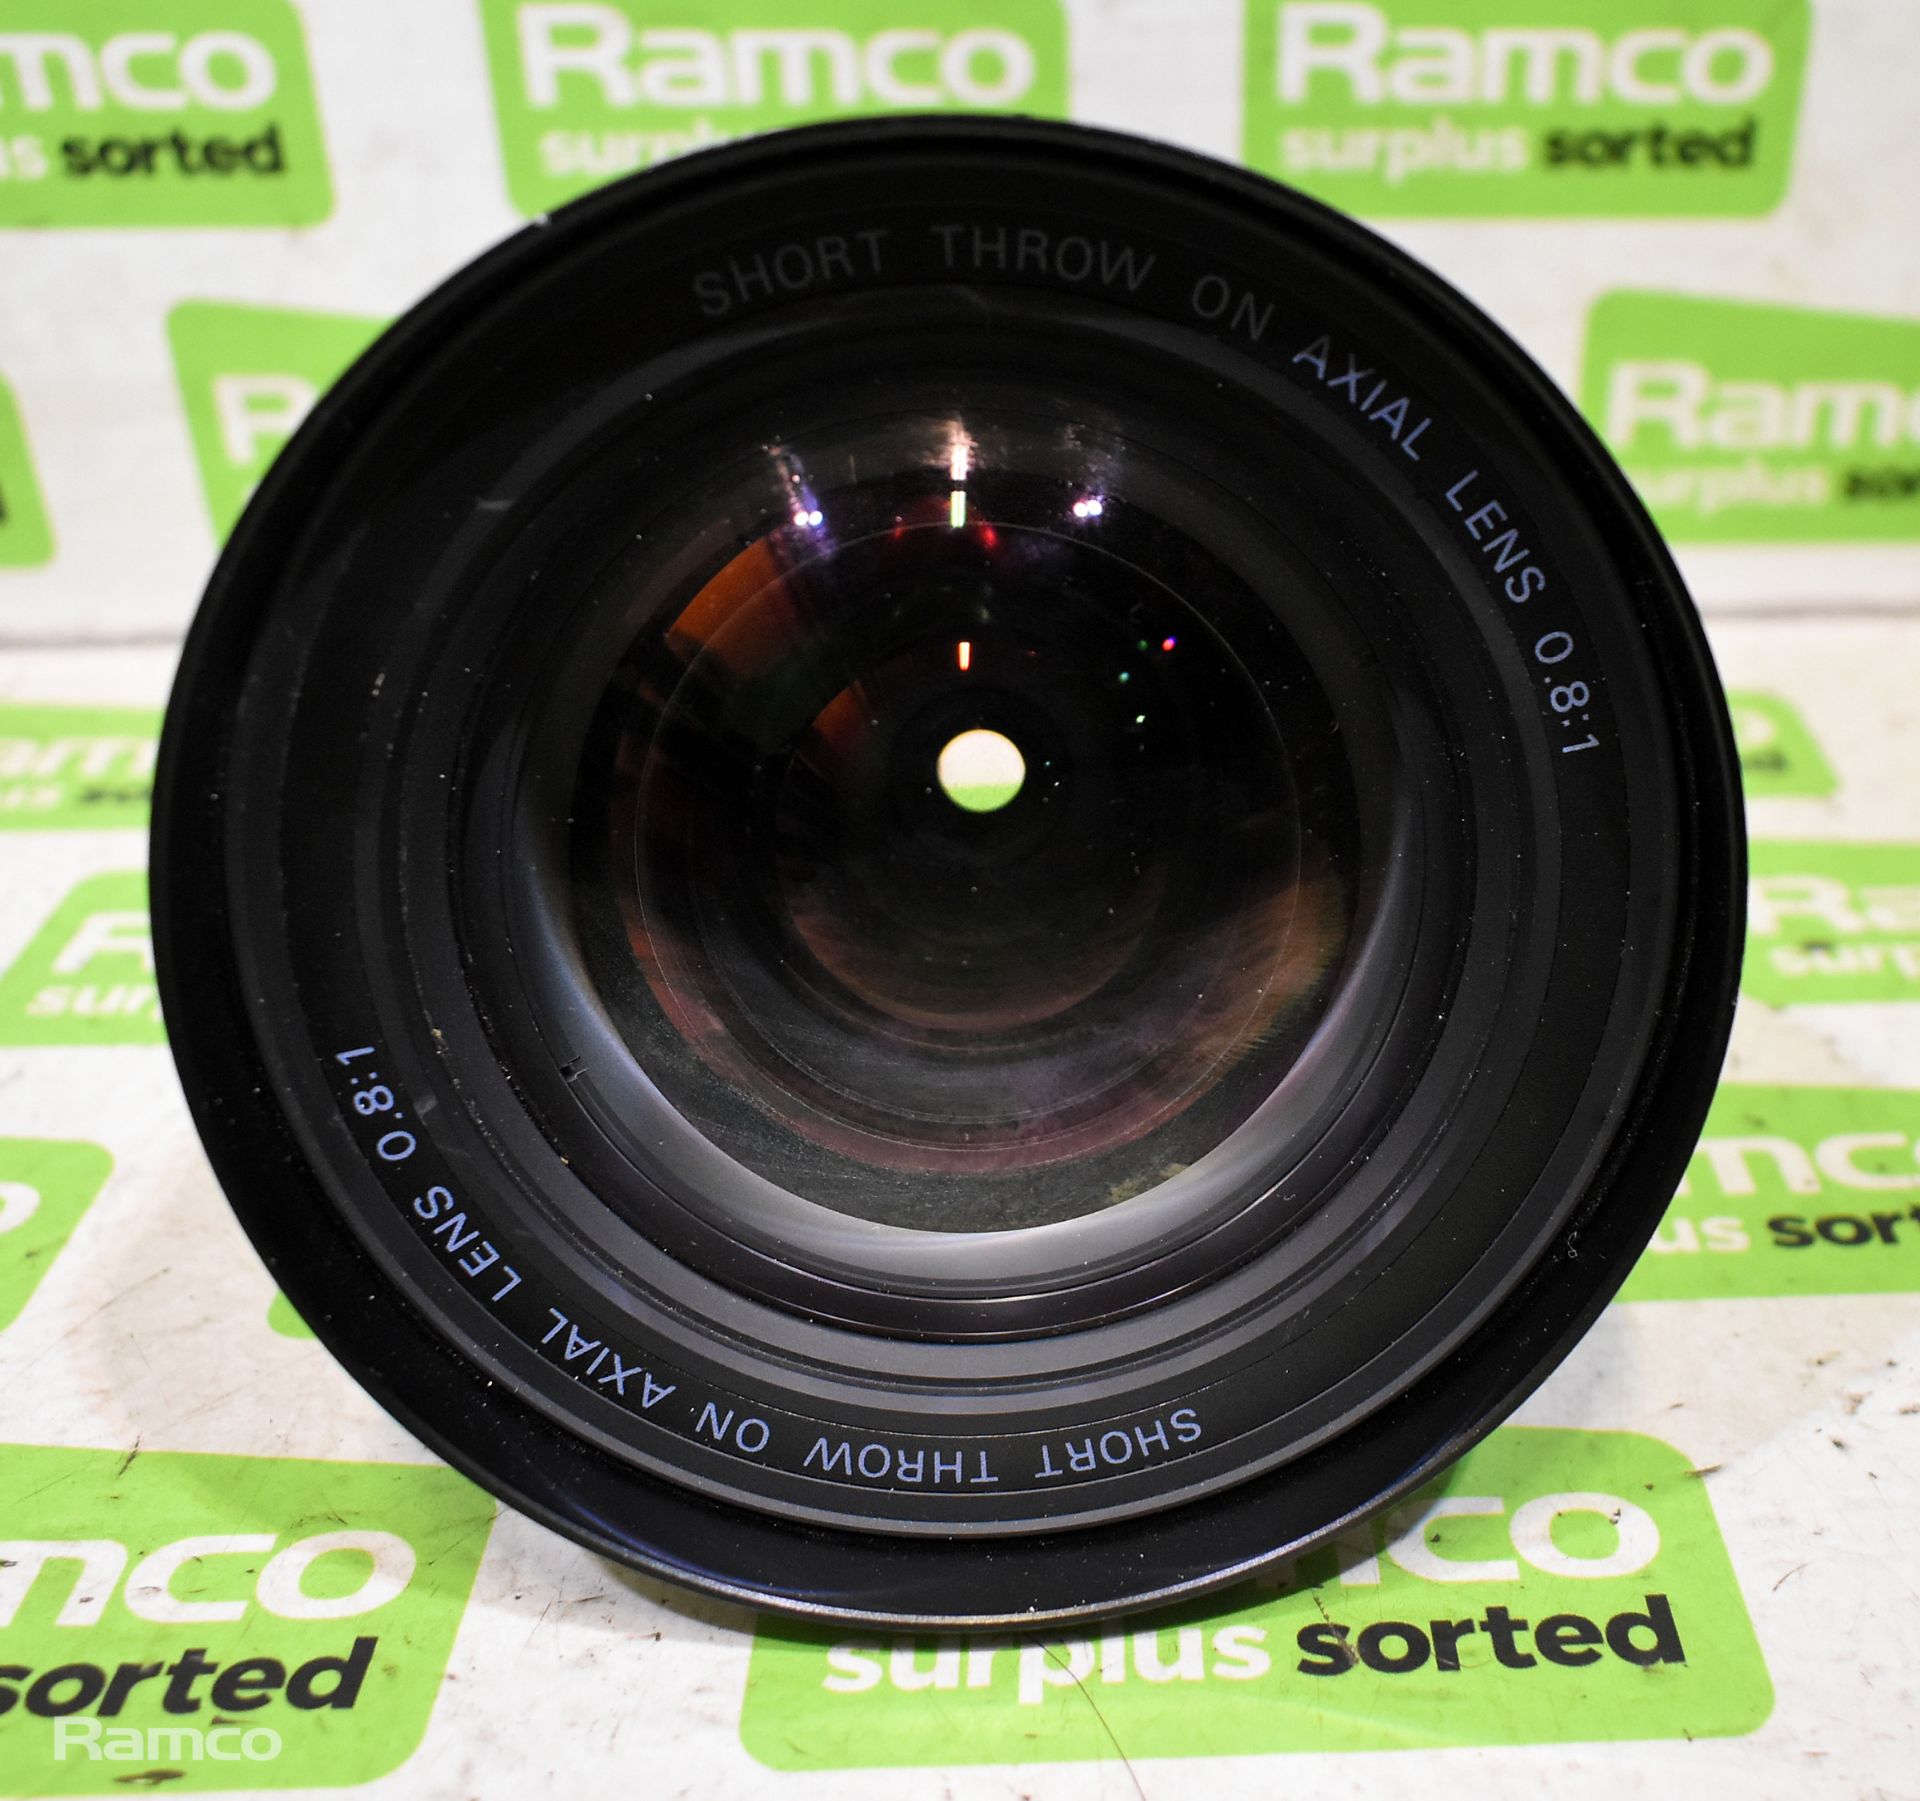 Short throw on axial lens 0.8:1 - L 170 x W 130 x H 130mm - Image 2 of 4